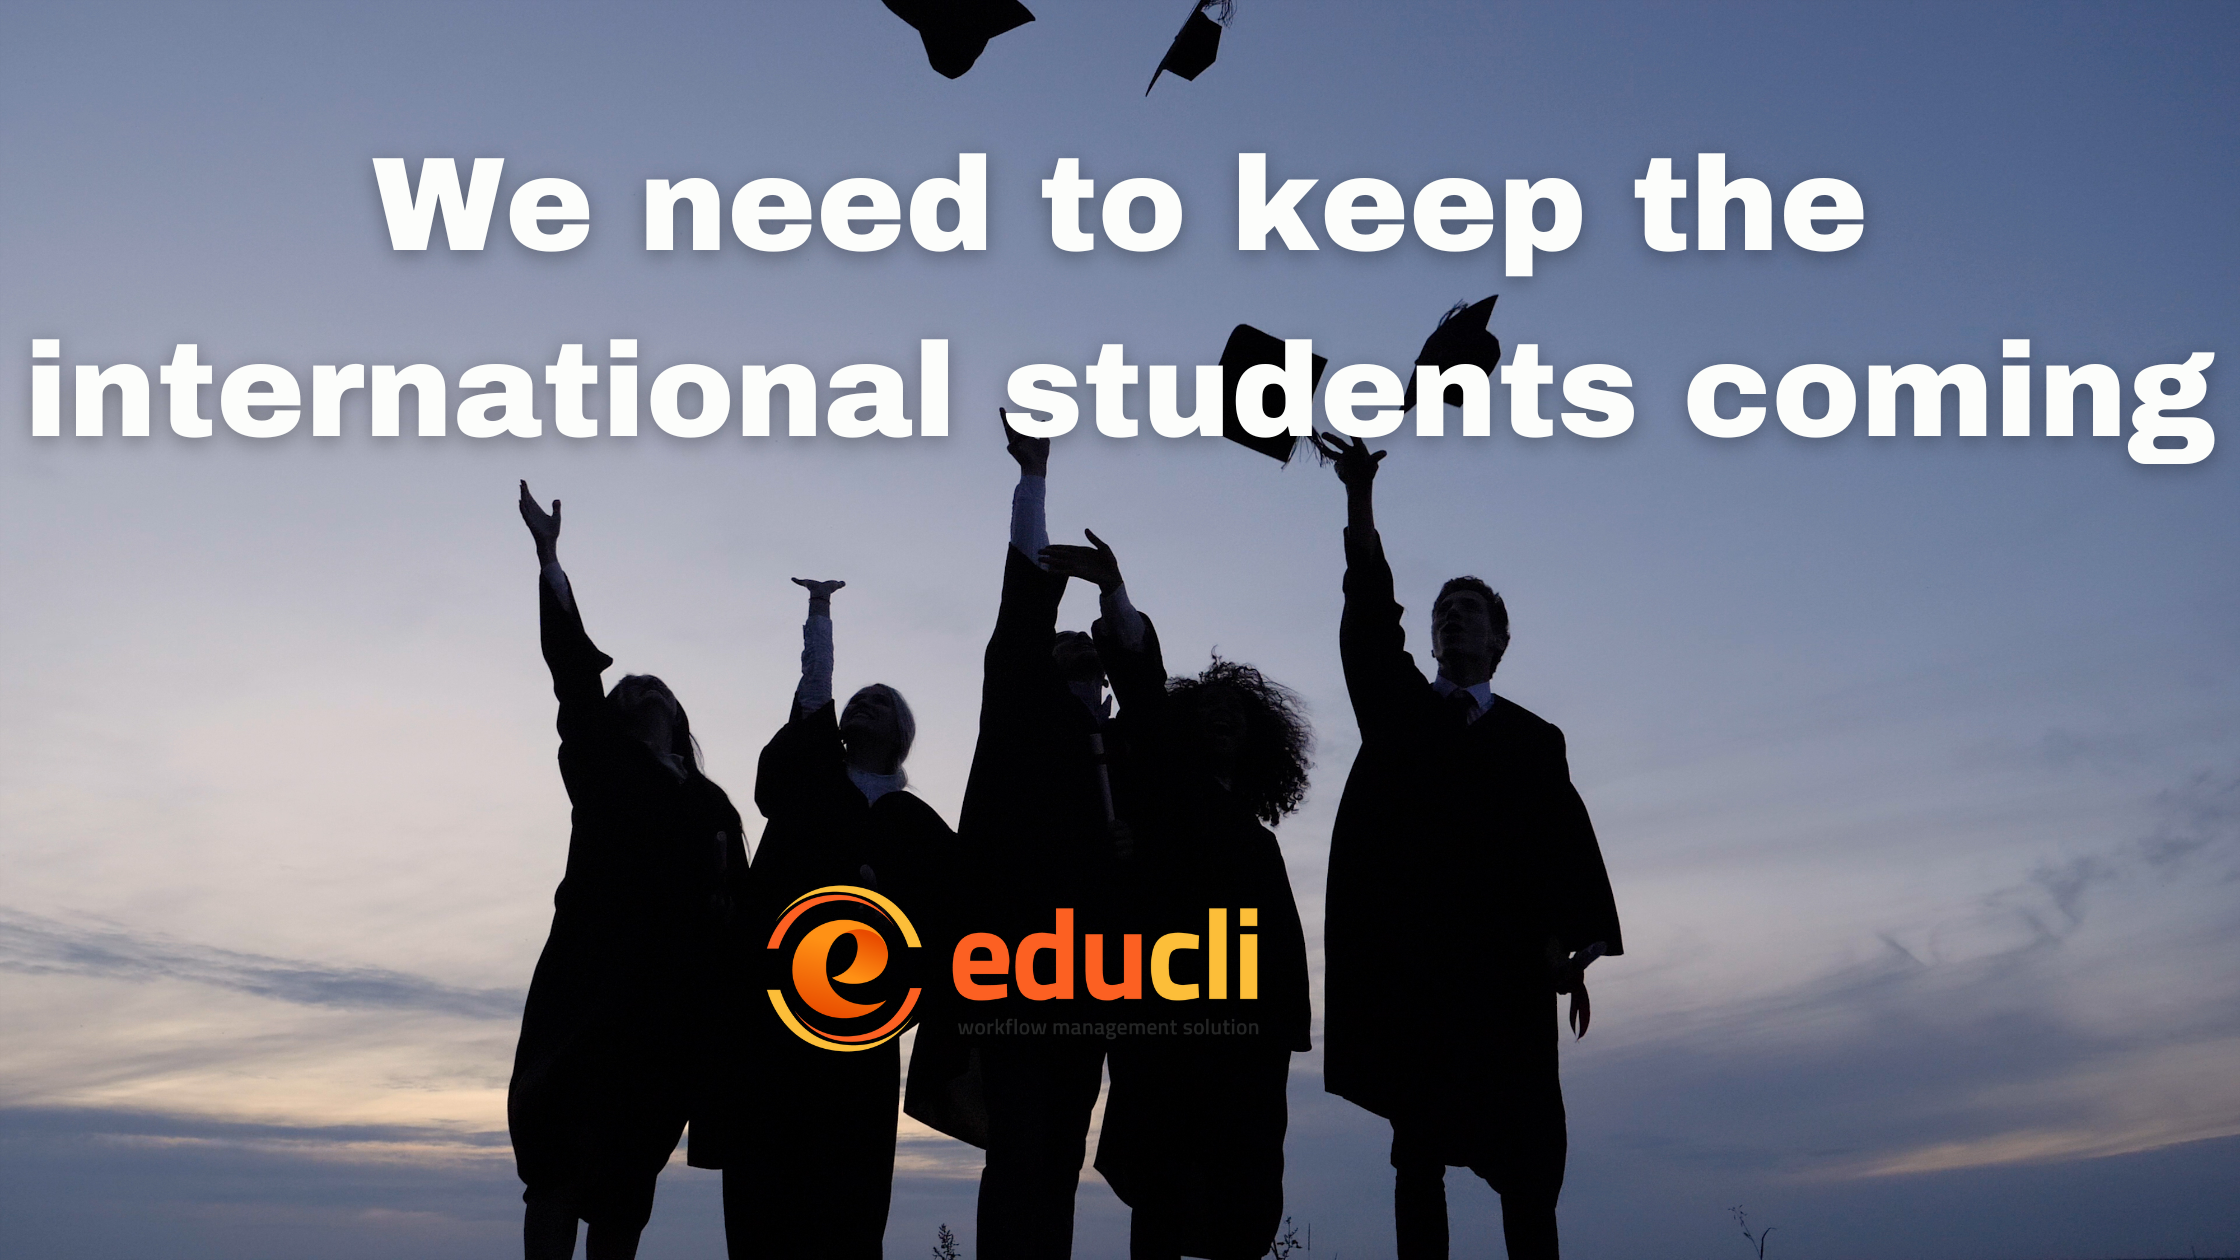 WE NEED TO KEEP THE INTERNATIONAL STUDENTS COMING